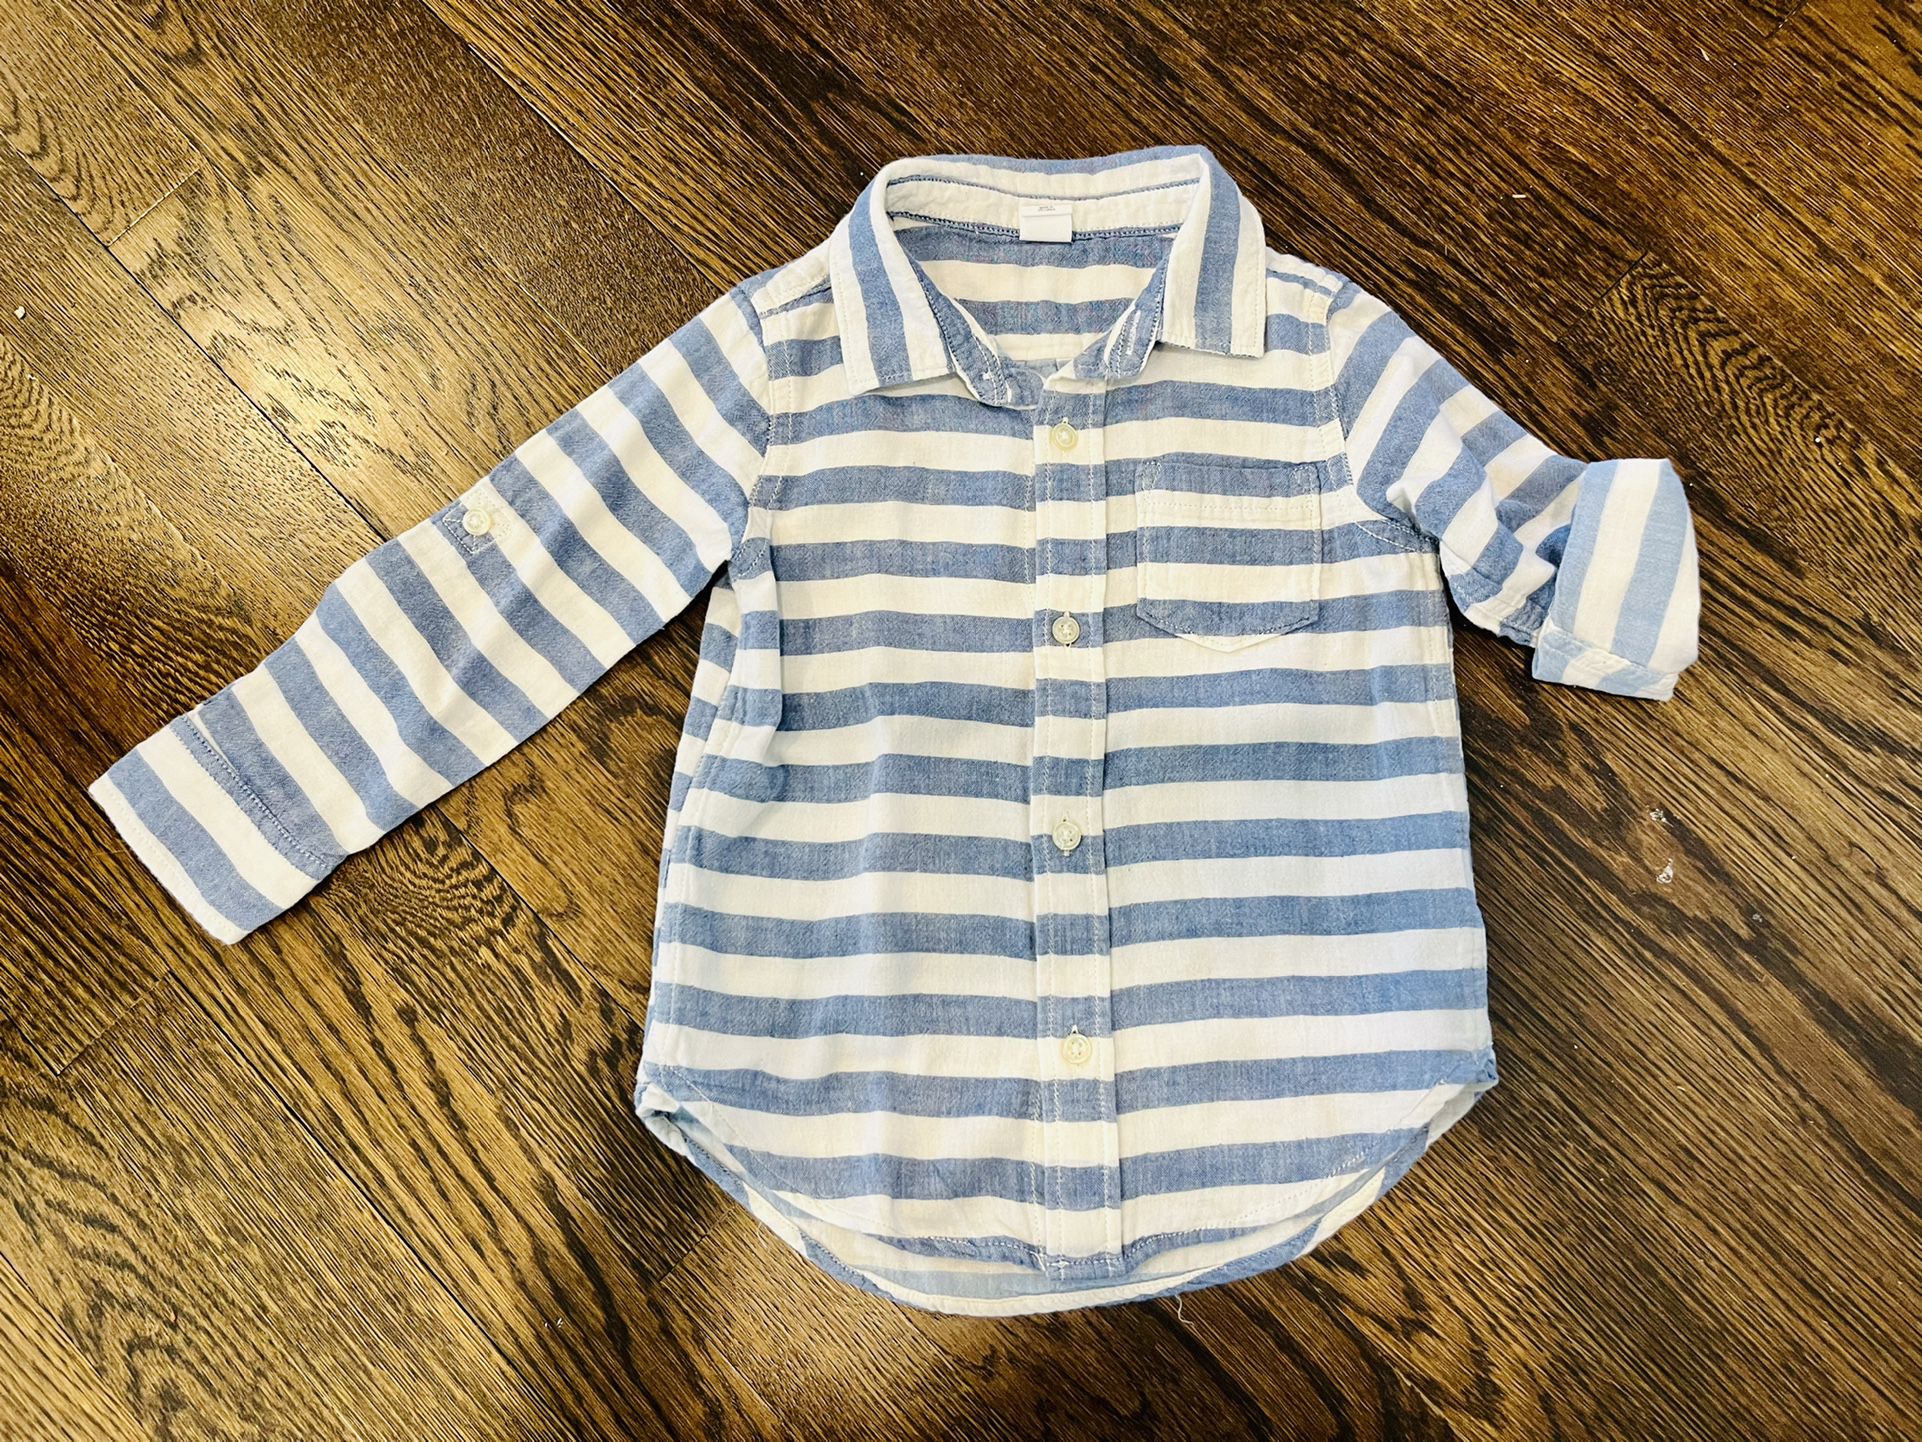 Baby Gap Blue/White Striped Collared Shirt - 3T